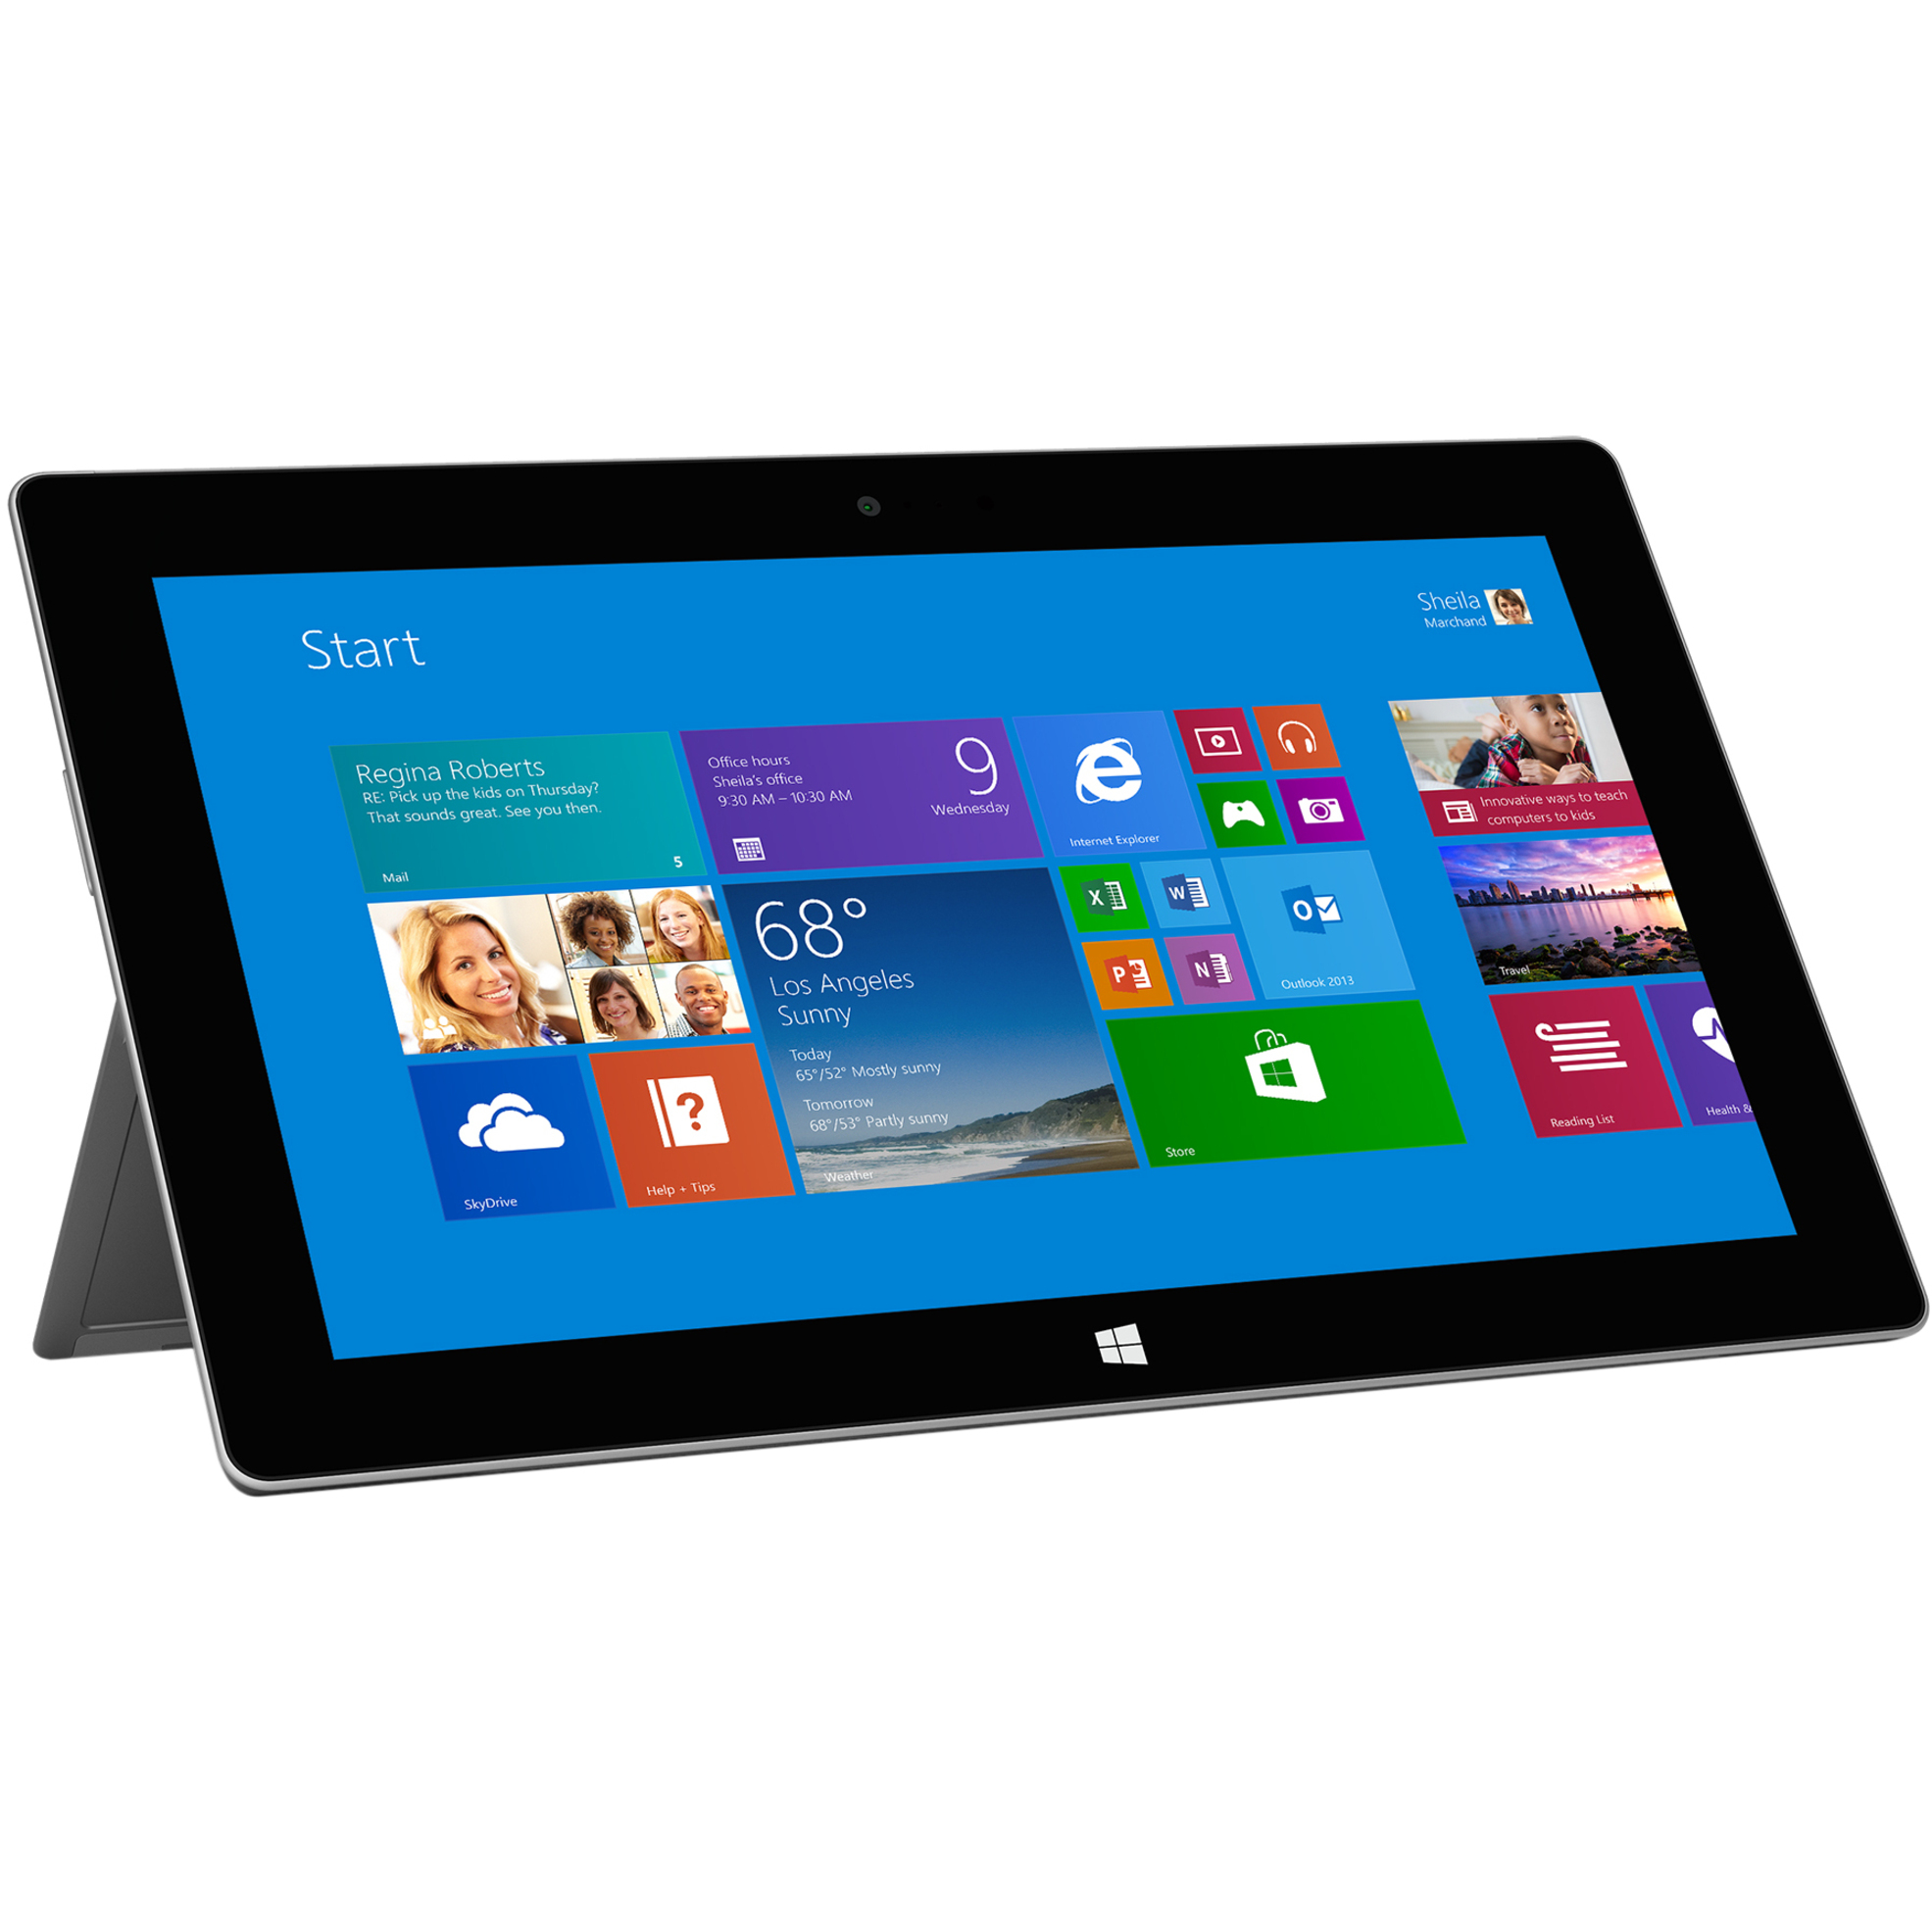 Microsoft Surface 2 Tablet, 10.6" Full HD, Cortex A15 Quad-core (4 Core) 1.70 GHz, 2 GB RAM, 64 GB Storage, Windows 8.1 RT, Magnesium Silver - image 5 of 5